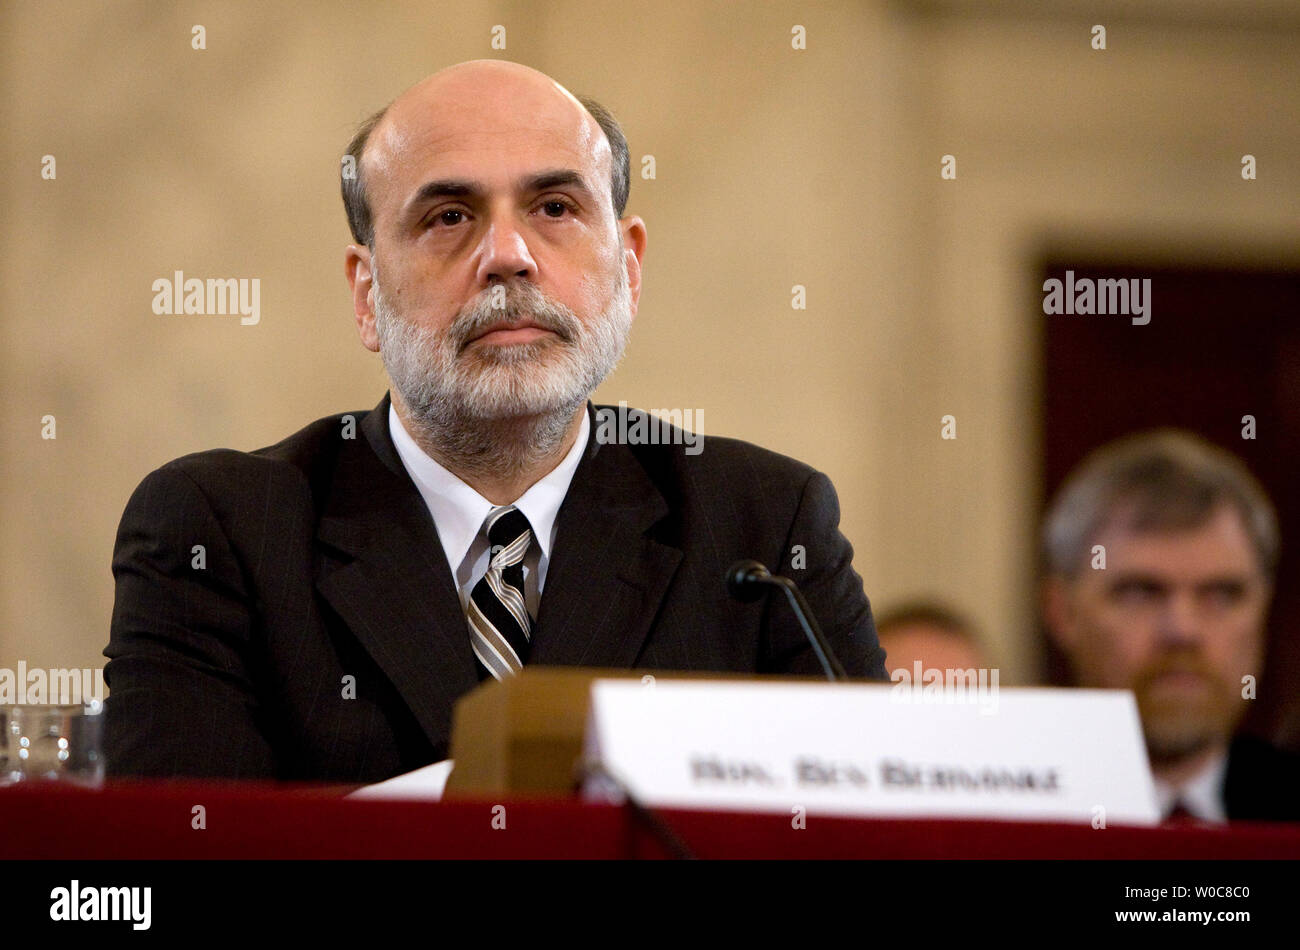 Federal Reserve Board Chairman Ben Bernanke testifies during a Senate Banking, Housing and Urban Affairs Committee hearing on the Federal Reserve's semiannual monetary policy report to Congress on Capitol Hill in Washington on July 15, 2008. (UPI Photo/Patrick D. McDermott) Stock Photo